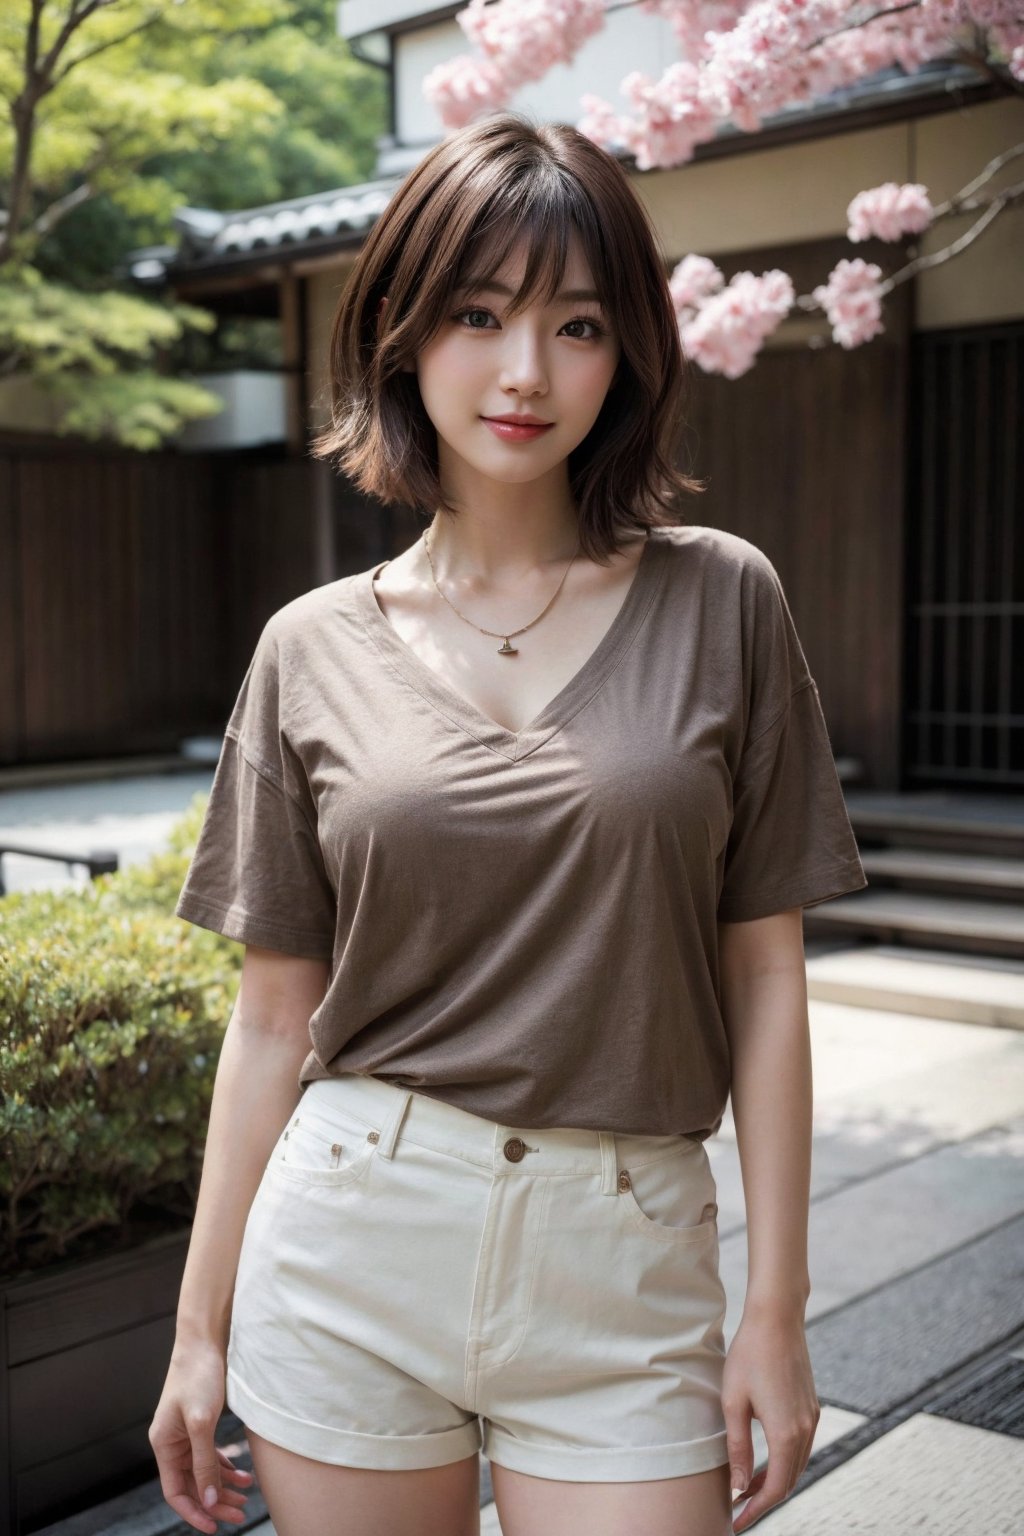 (Best quality, 8k, 32k, Masterpiece, UHD:1.2), RAW photo, Photo of Pretty Japanese woman, 1girl, judy, (medium-short dark brown outward hair), double eyelids, (head_scale:0.7),natural saggy medium breasts, wide hips, long-legged, thick body, tall stature, pale skin, detailed real skin texture, necklace, T-shirt, casual short, outdoor, natural daylight, Japan Zen Garden, models like posing, enchanting smile, sexy face, look at viewer, from below, street snaps, ray tracing, medium-short hair, detailed eyes, detailed facial, ultra detailed skin texture, detailed fabric rendering, detailed details 